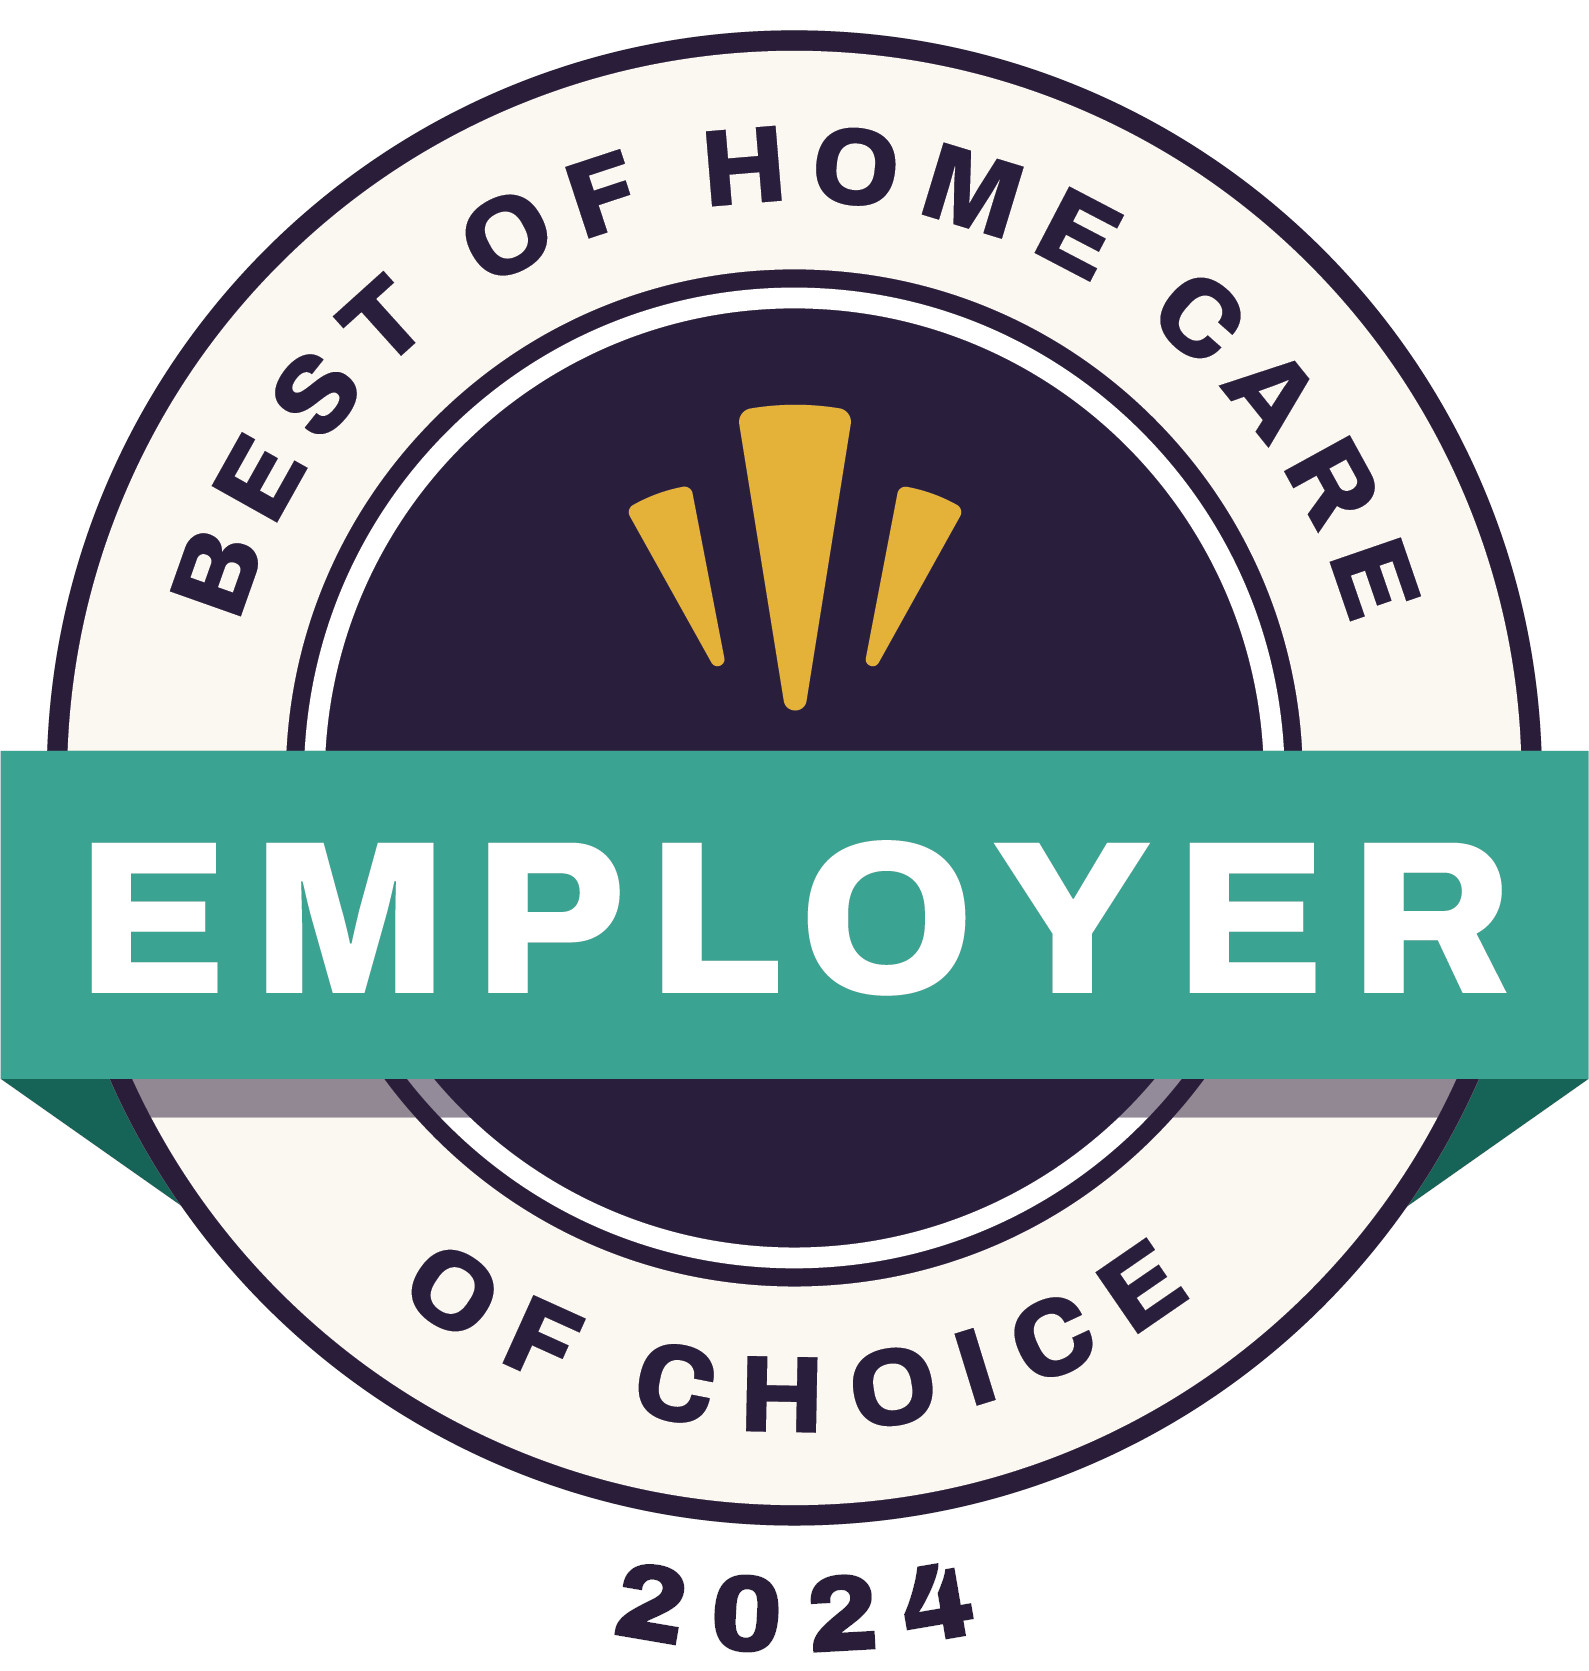 Home care agencies that qualify for "Employer of Choice" have earned high marks from their caregivers. Great care starts with happy caregivers and to qualify, "Employers of Choice" must outperform other their local competitors in caregiver satisfaction based on scores and feedback gathered from verified caregivers.